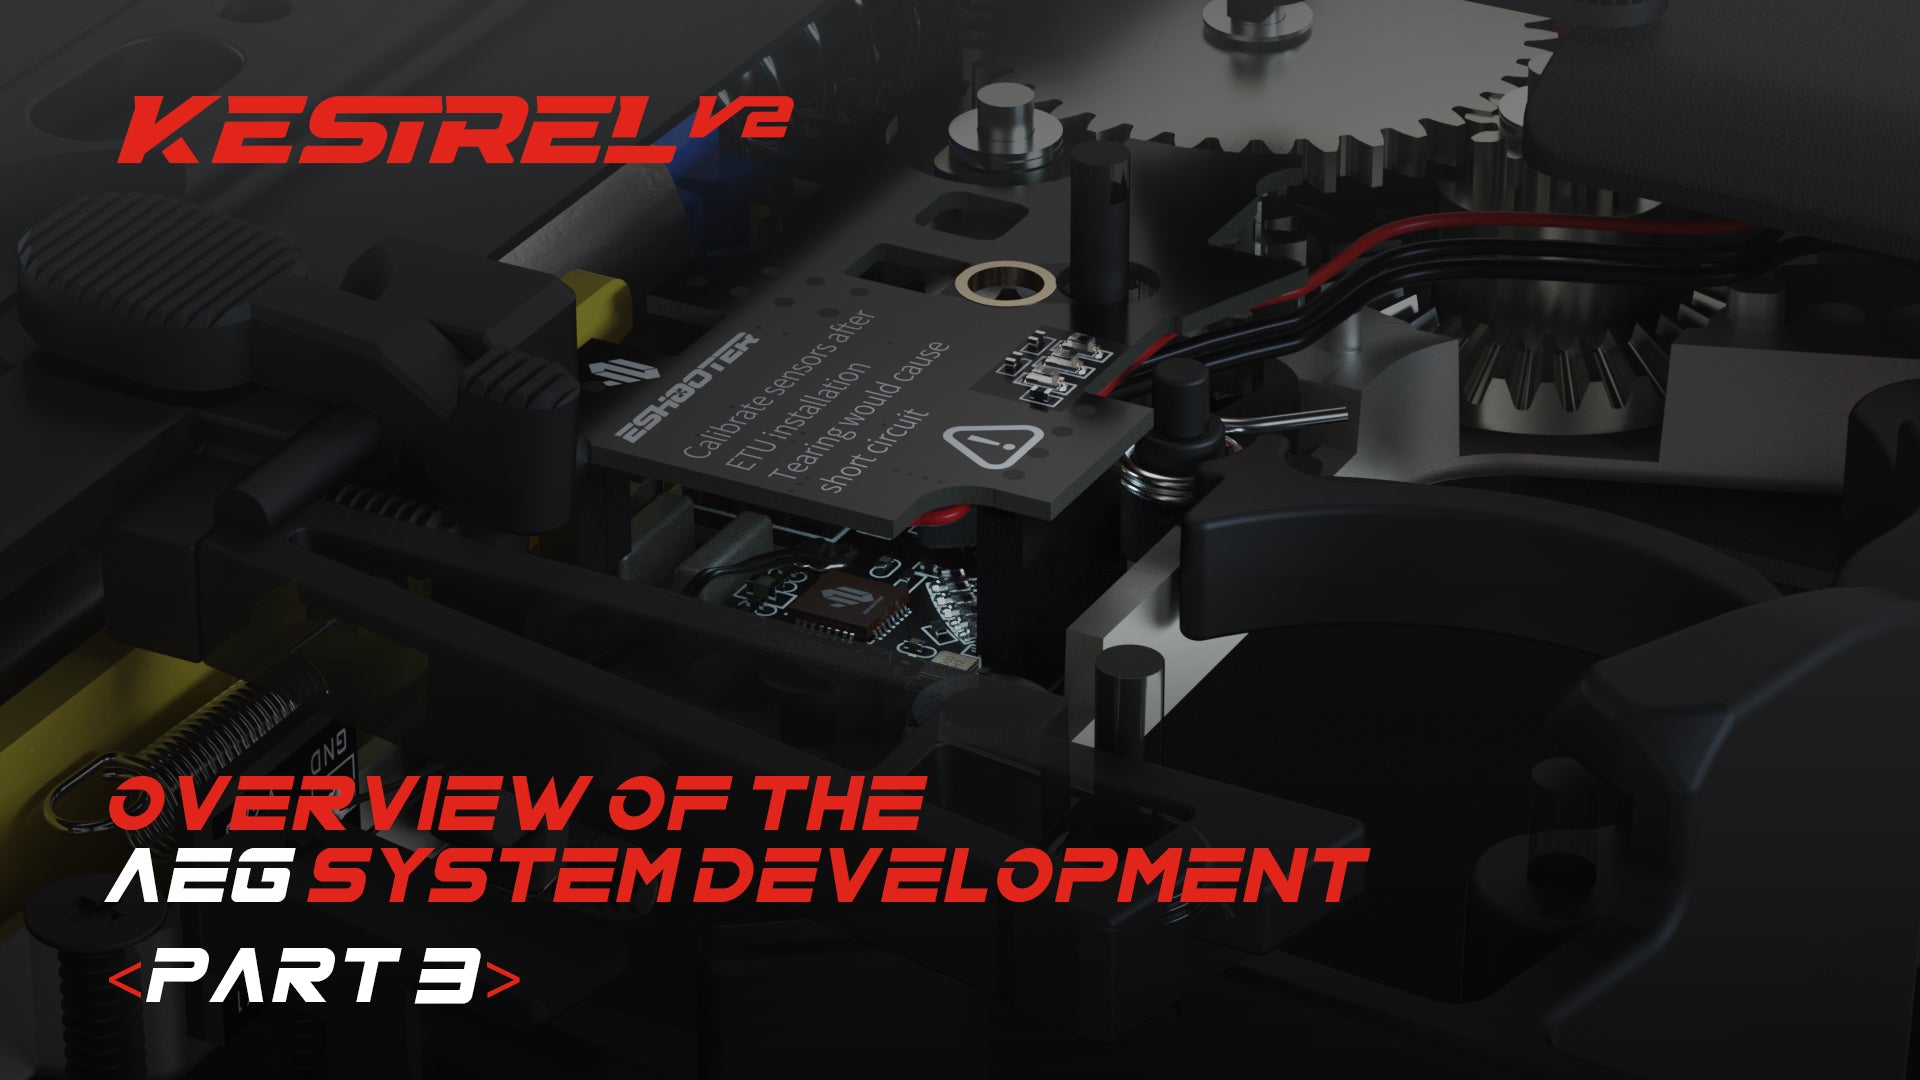 Overview of the AEG System Development <Part 3>